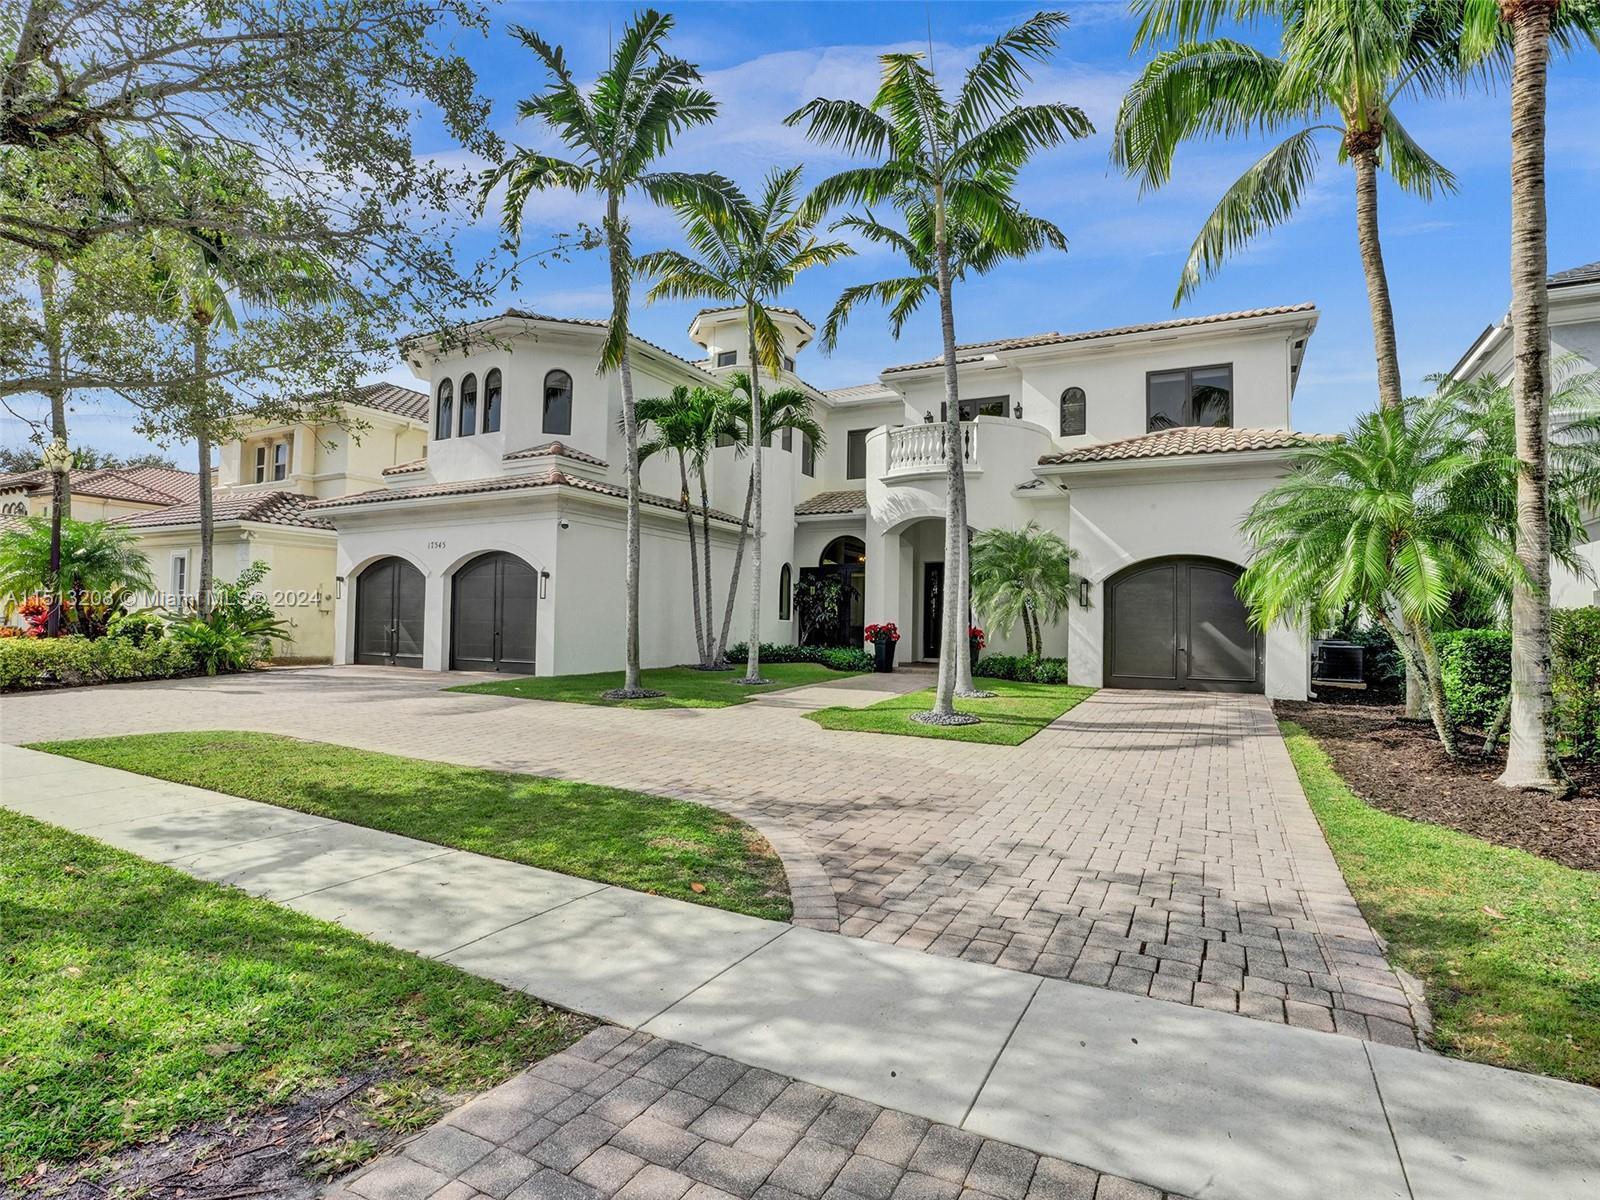 Luxurious Estate, nestled in the exclusive The Oaks private community. Featuring 7 spacious bed and 